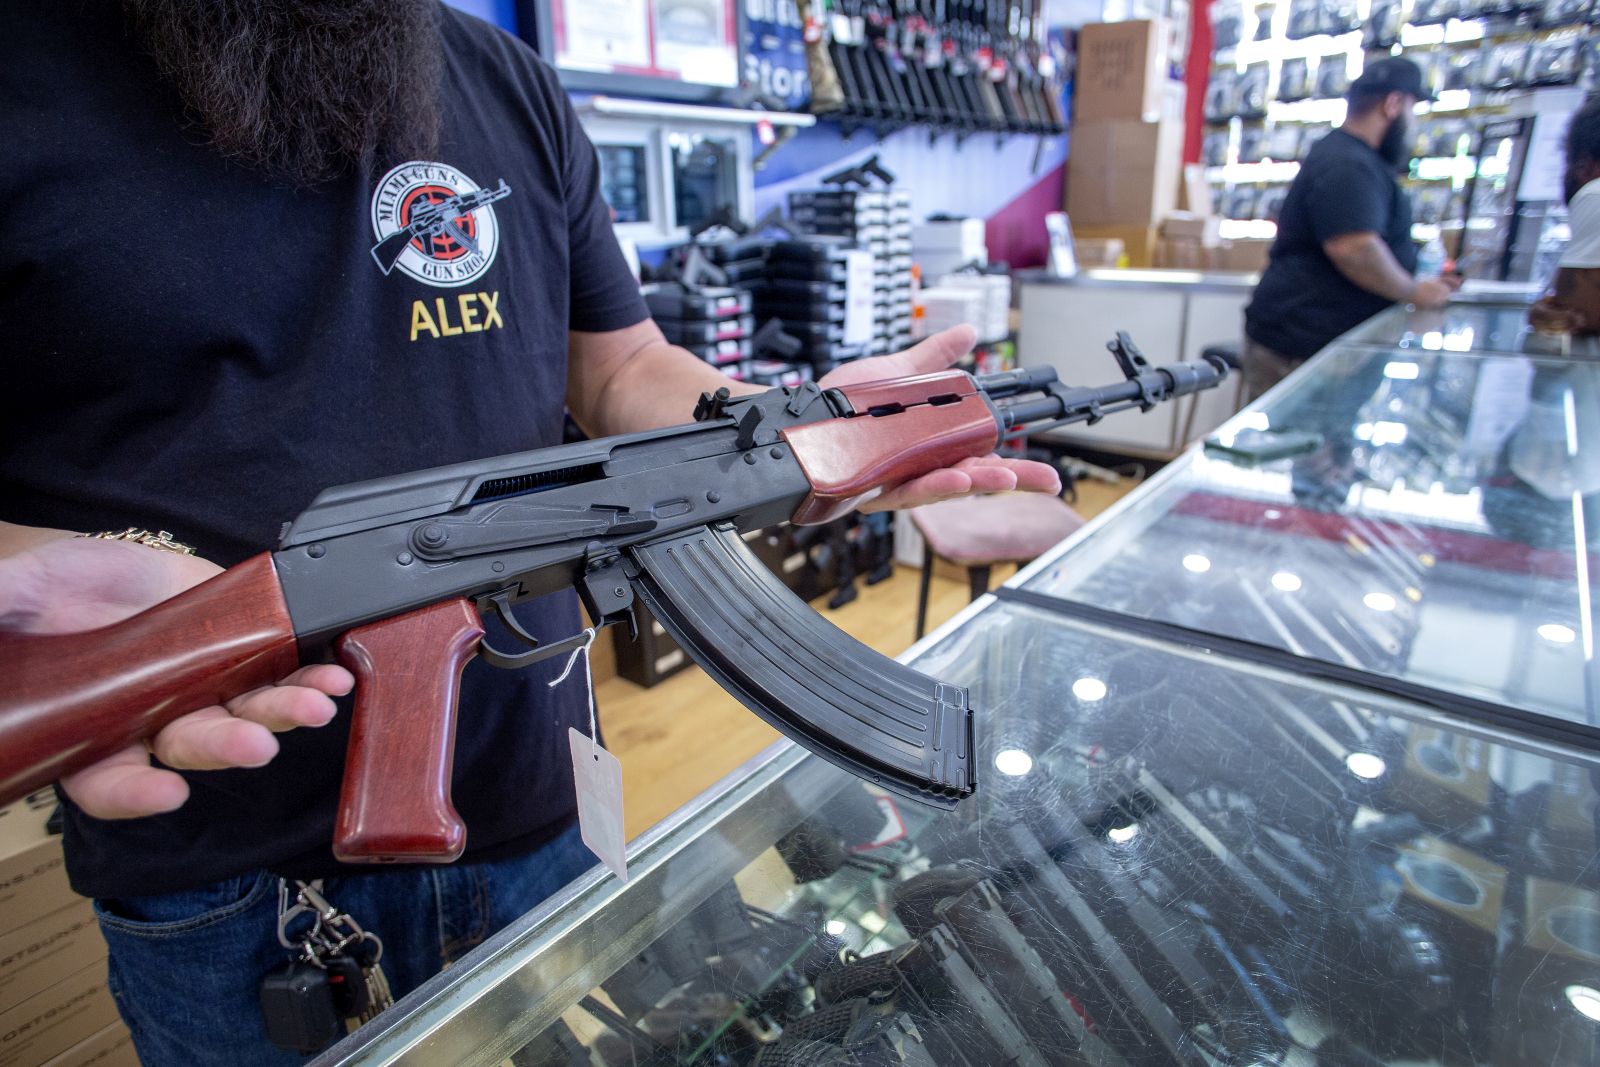 epa10028672 A worker at the Miami Guns Store and Range shows an AK-47 gun, in Hialeah, Florida, USA, 22 June 2022. On 21 June a bipartisan group of US senators released the Bipartisan Safer Communities Act to control gun violence, which if passed by Congress, could become the most significant renovation of the nation's gun laws in decades.  EPA/CRISTOBAL HERRERA-ULASHKEVICH